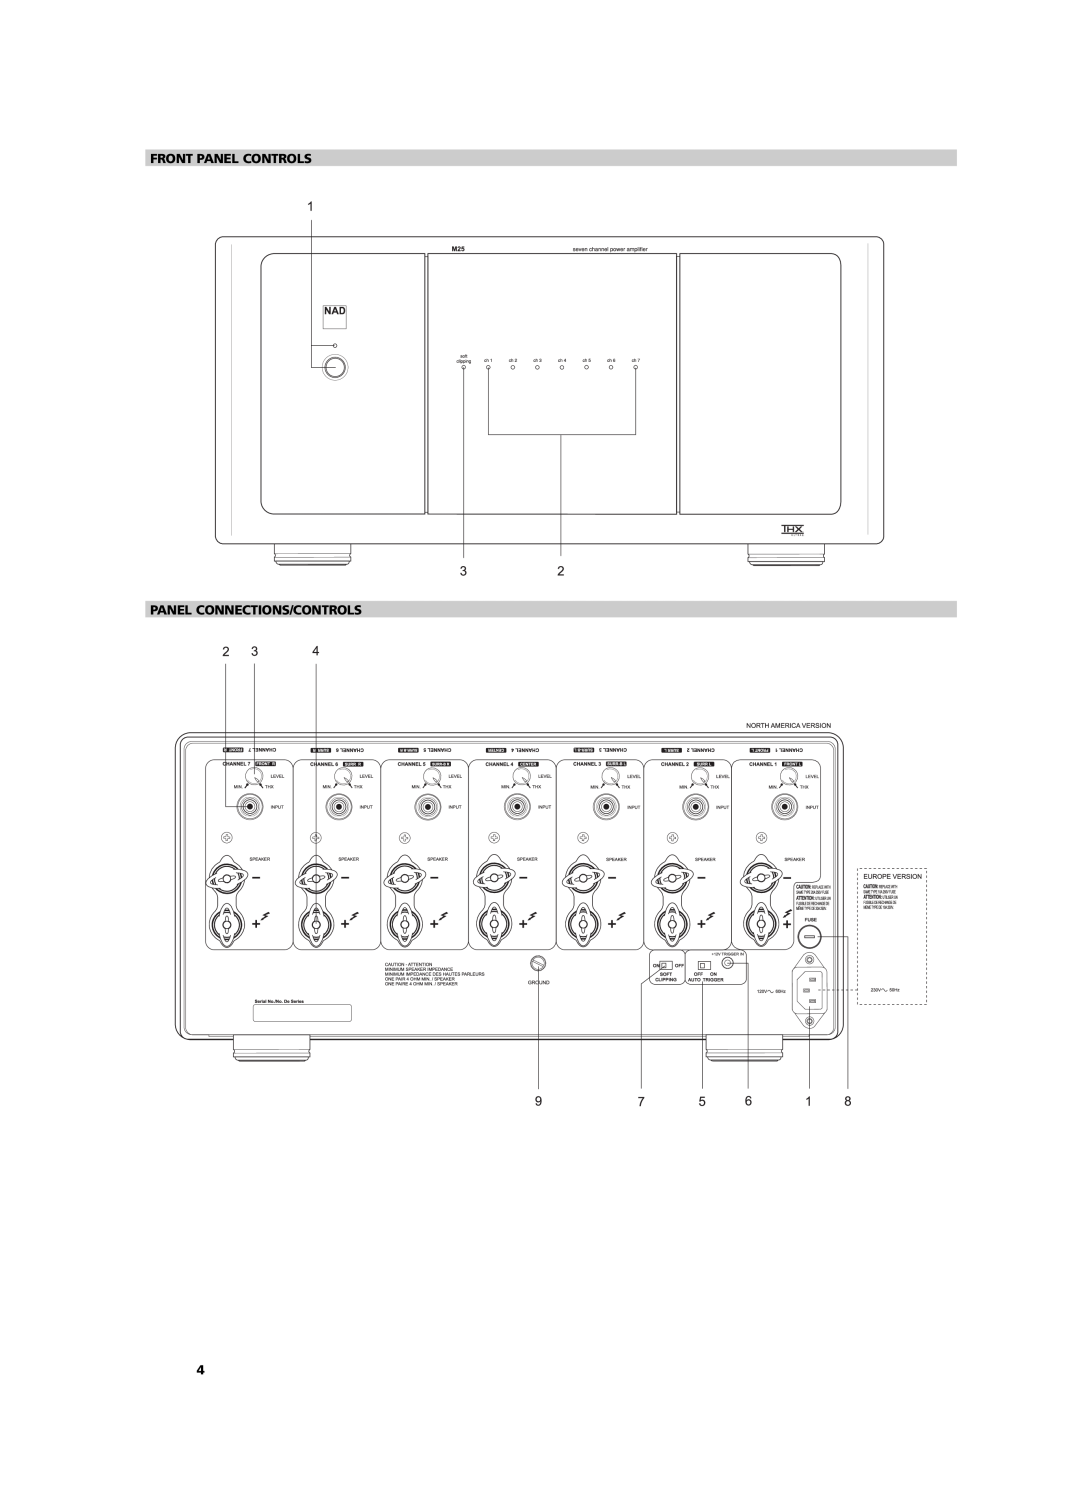 NAD M25 owner manual Front Panel Controls Panel Connections/Controls 